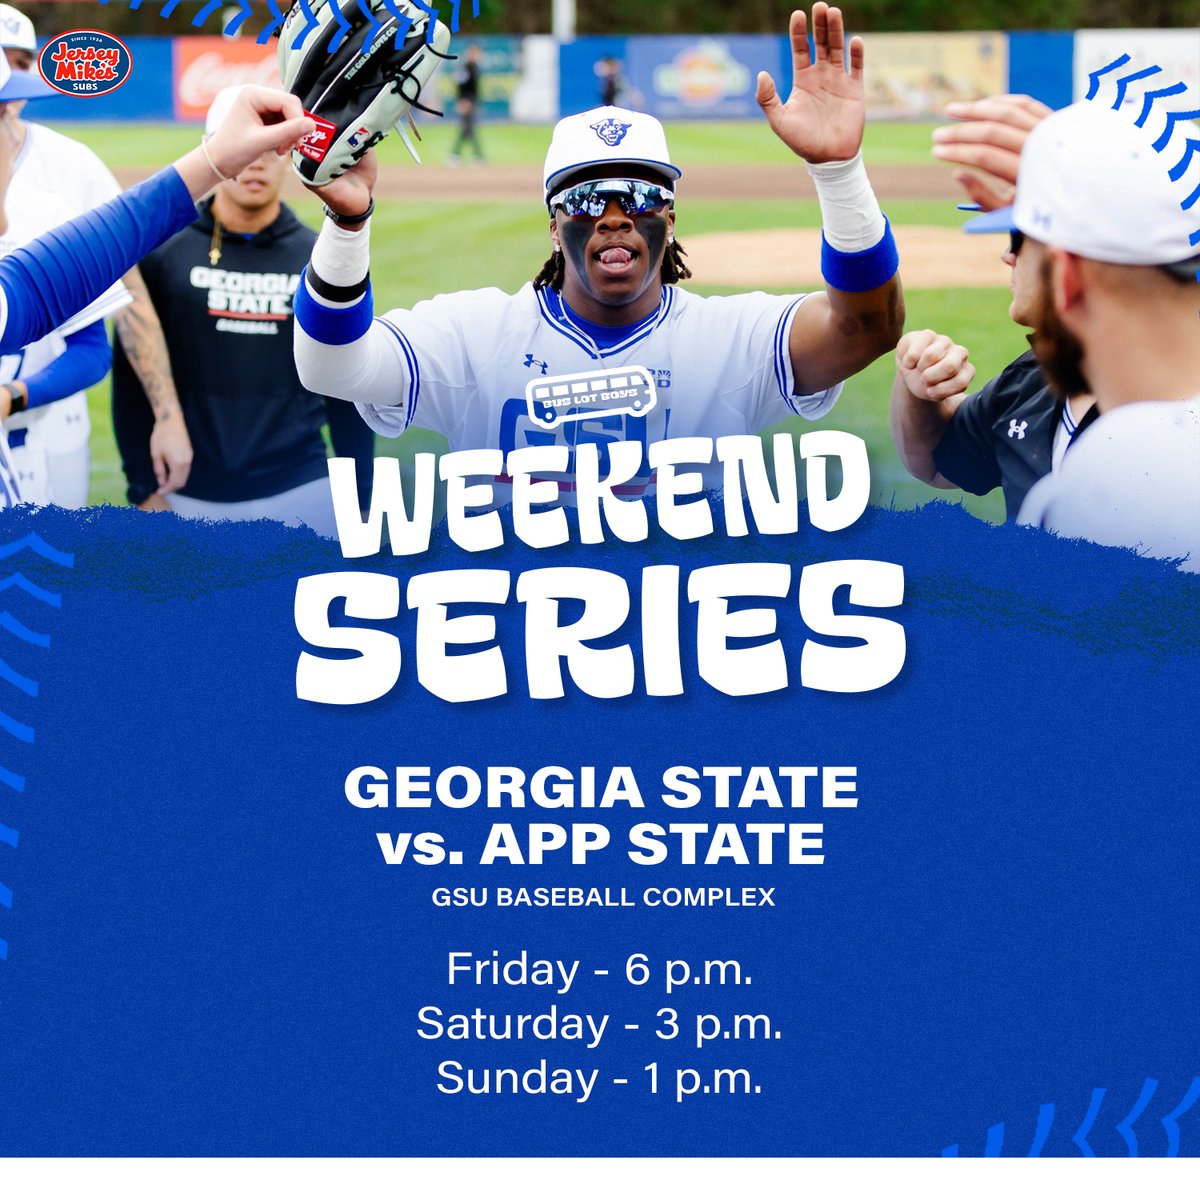 Georgia State & App State are tied for the #SunBeltBsb lead with 68 HR as they meet this weekend.

Series Preview ➡️ t.gsu.edu/4beqKF9

#LightItBlue | #BLB